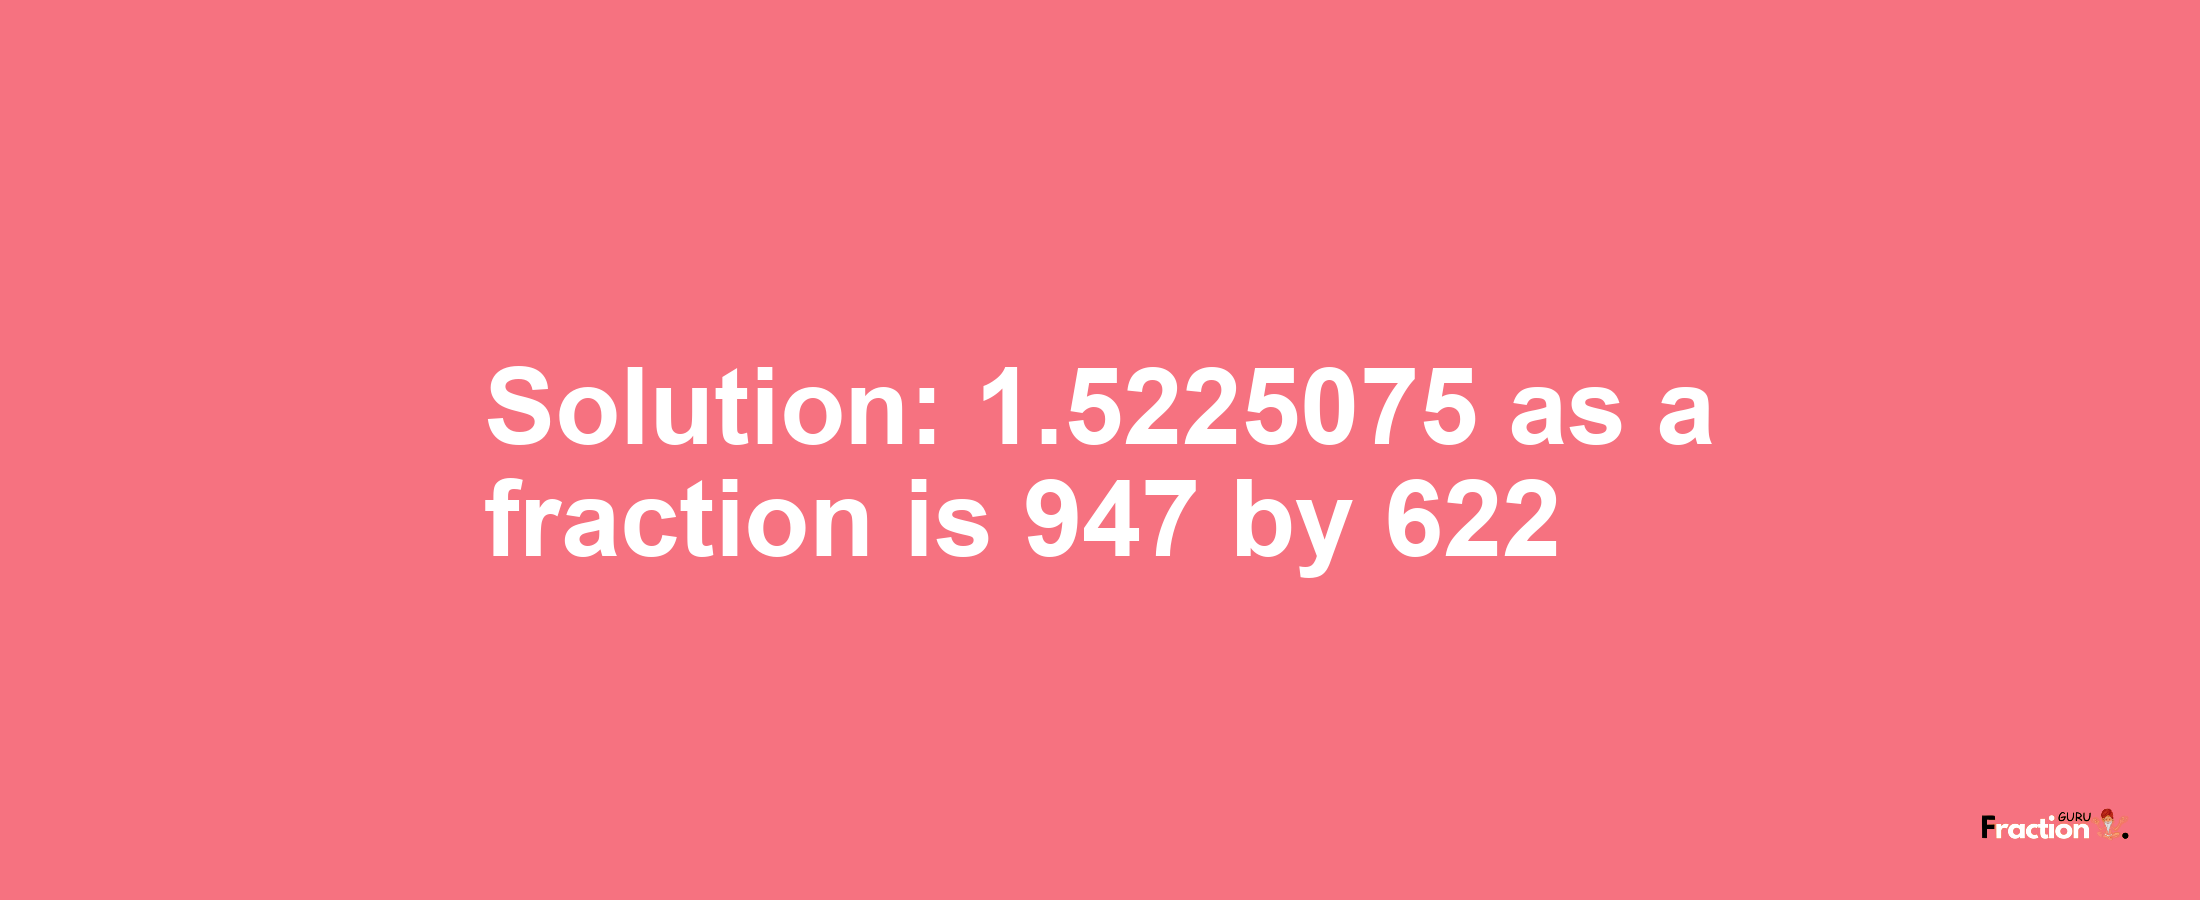 Solution:1.5225075 as a fraction is 947/622